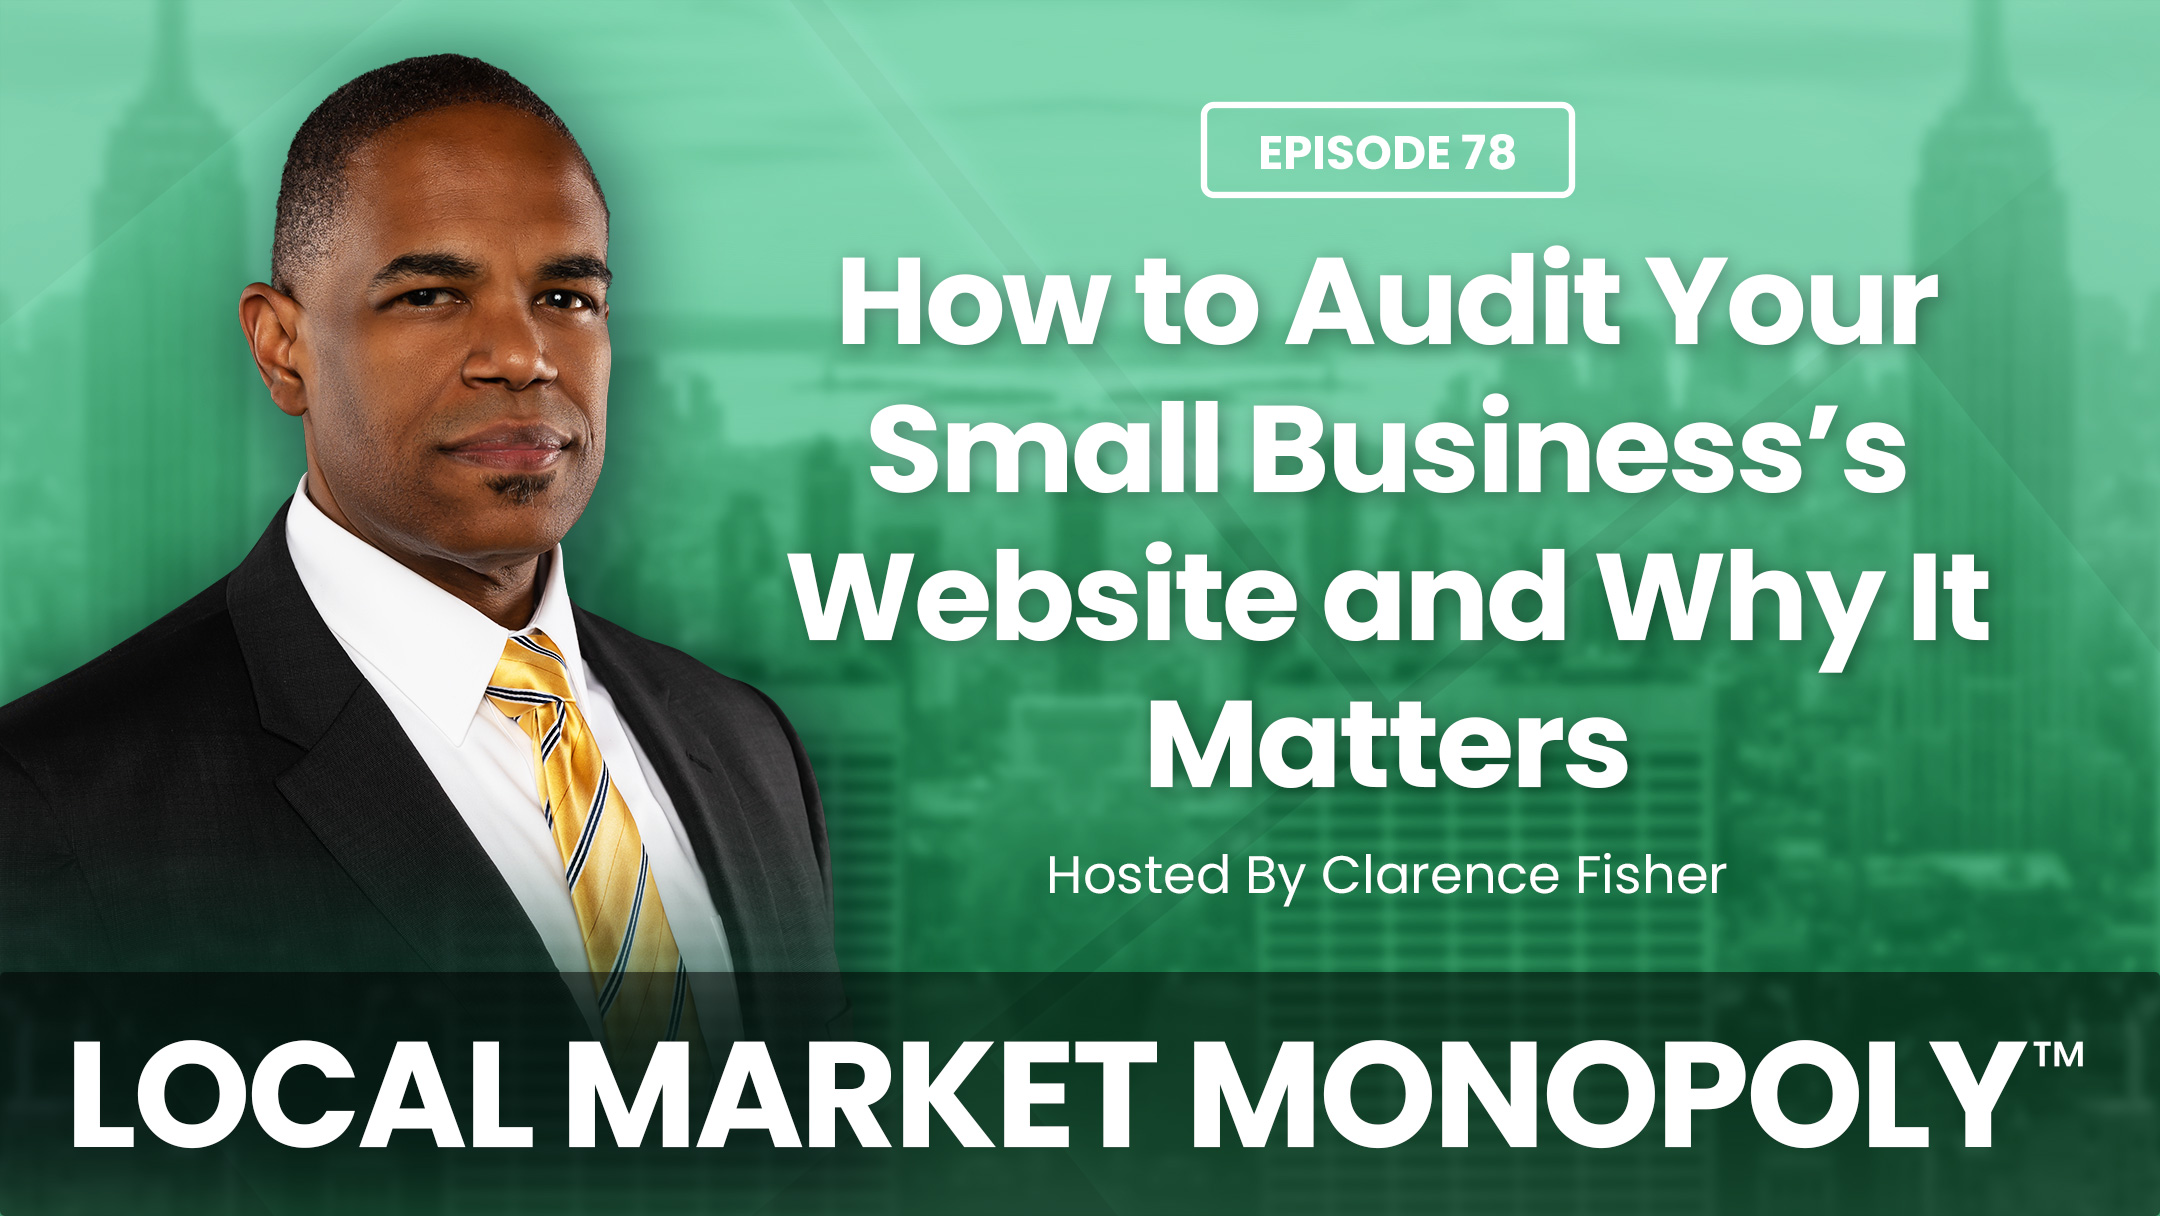 How to Audit Your Small Business’s Website and Why It Matters